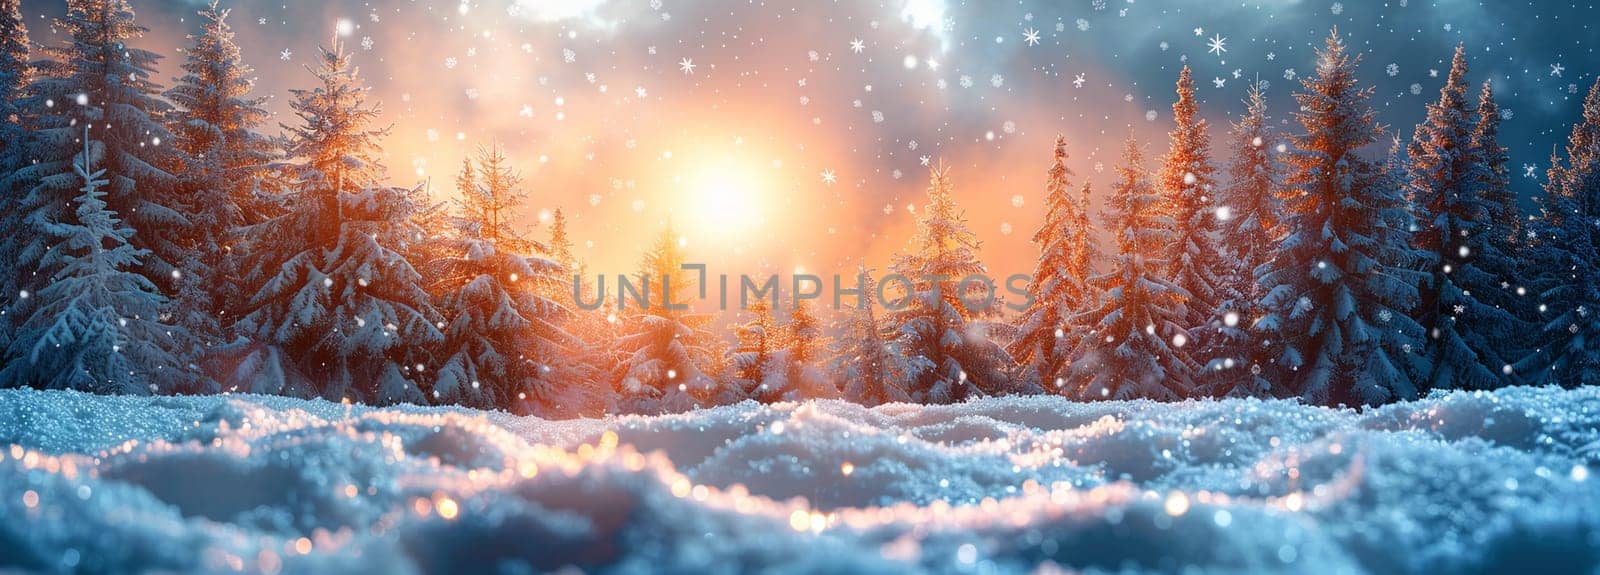 Tranquil winter forest scene with sunlight breaking through snow-covered pine trees, evoking serenity and natural beauty in pristine wilderness.